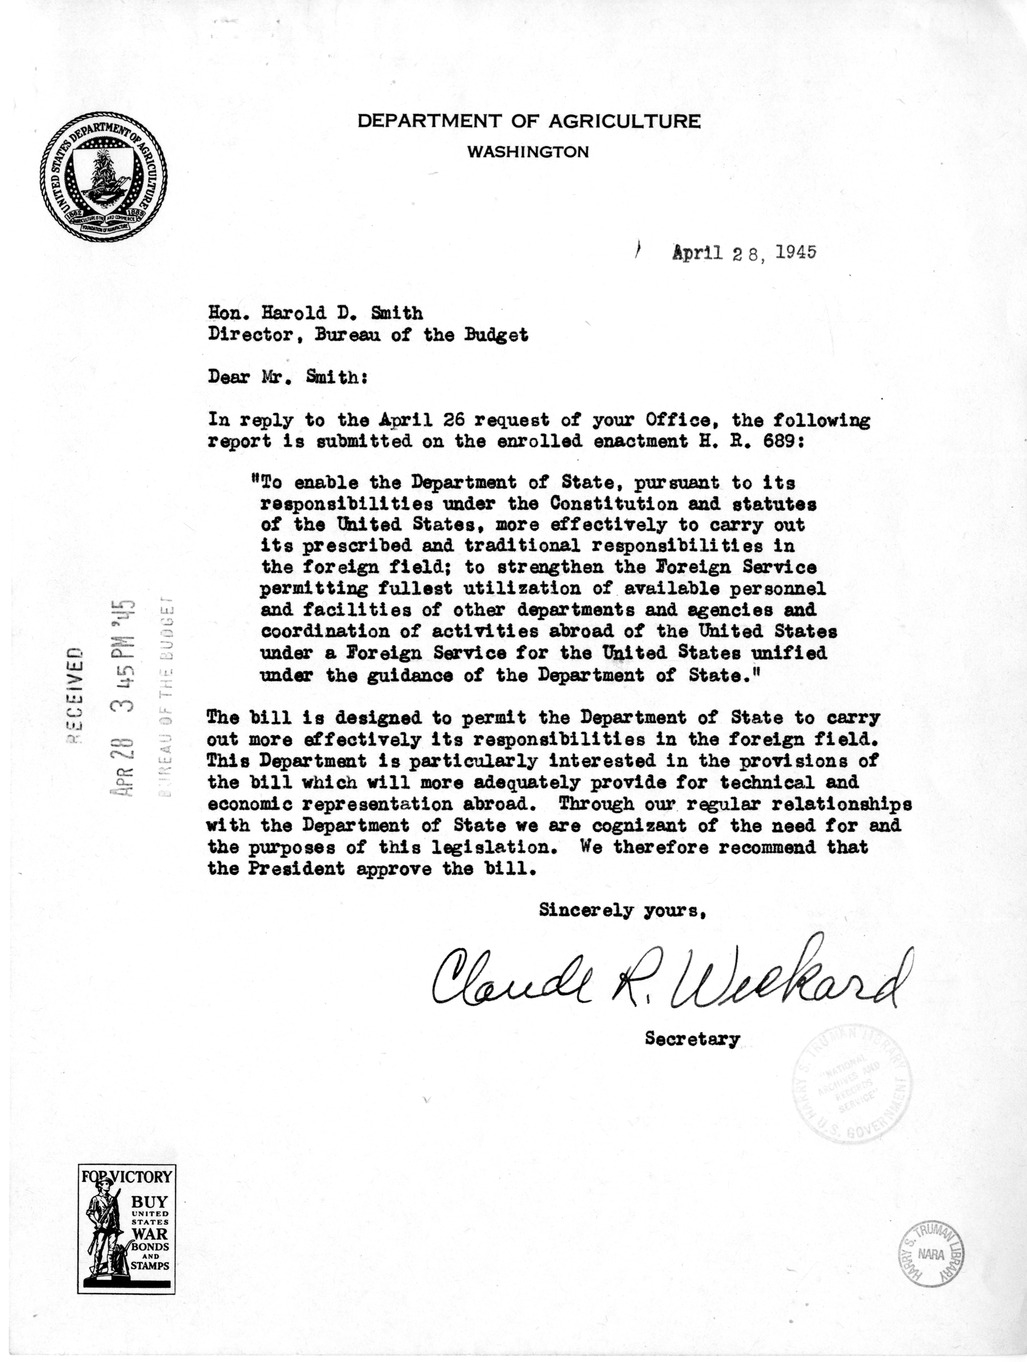 Memorandum from Harold D. Smith to M. C. Latta, H.R. 689, Regarding the Department of State and the Foreign Service, with Attachments